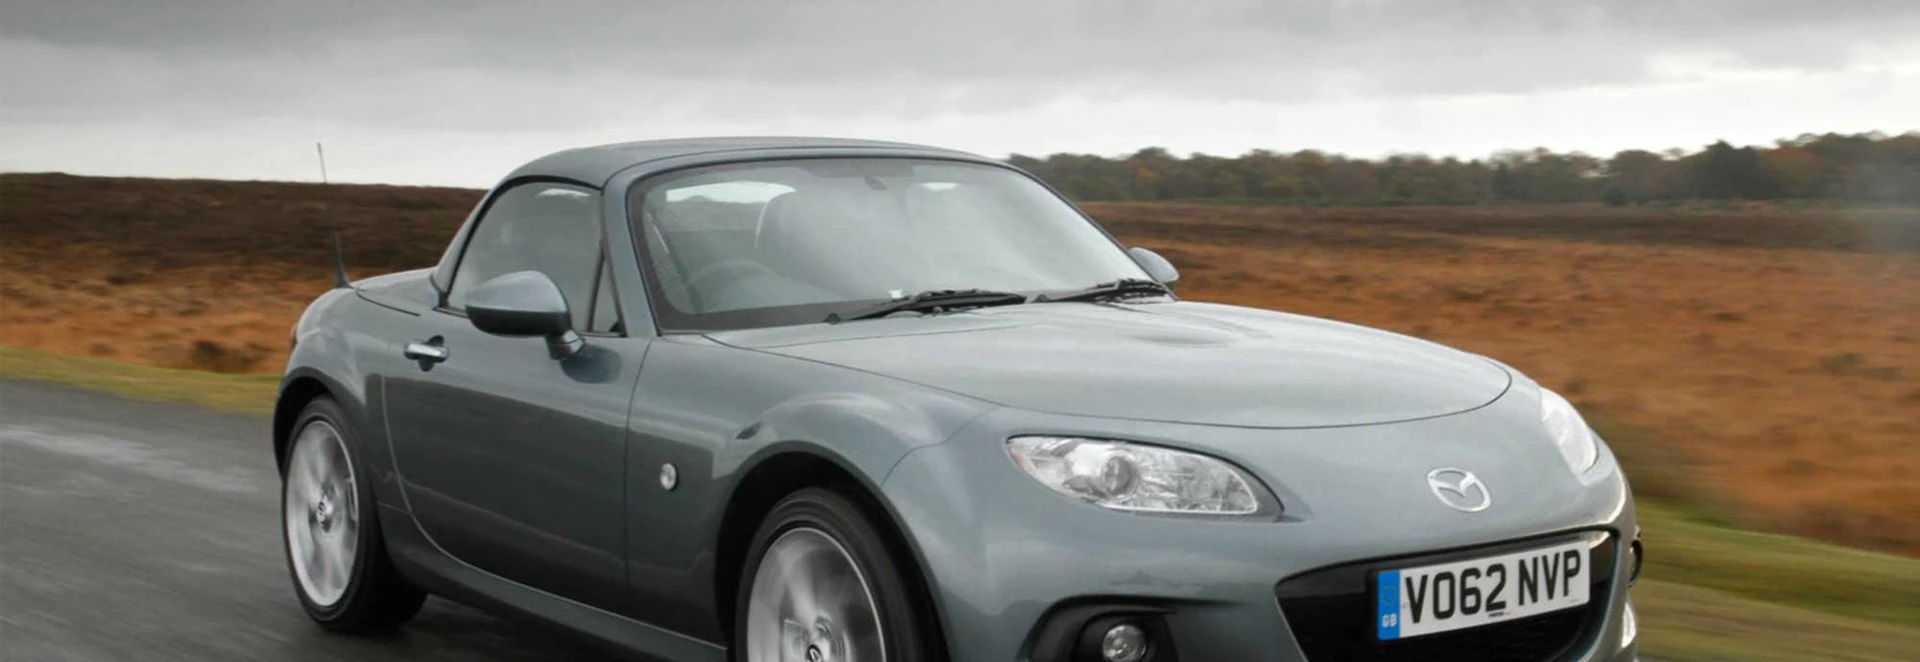 Mazda MX-5 Roadster Coupe review 